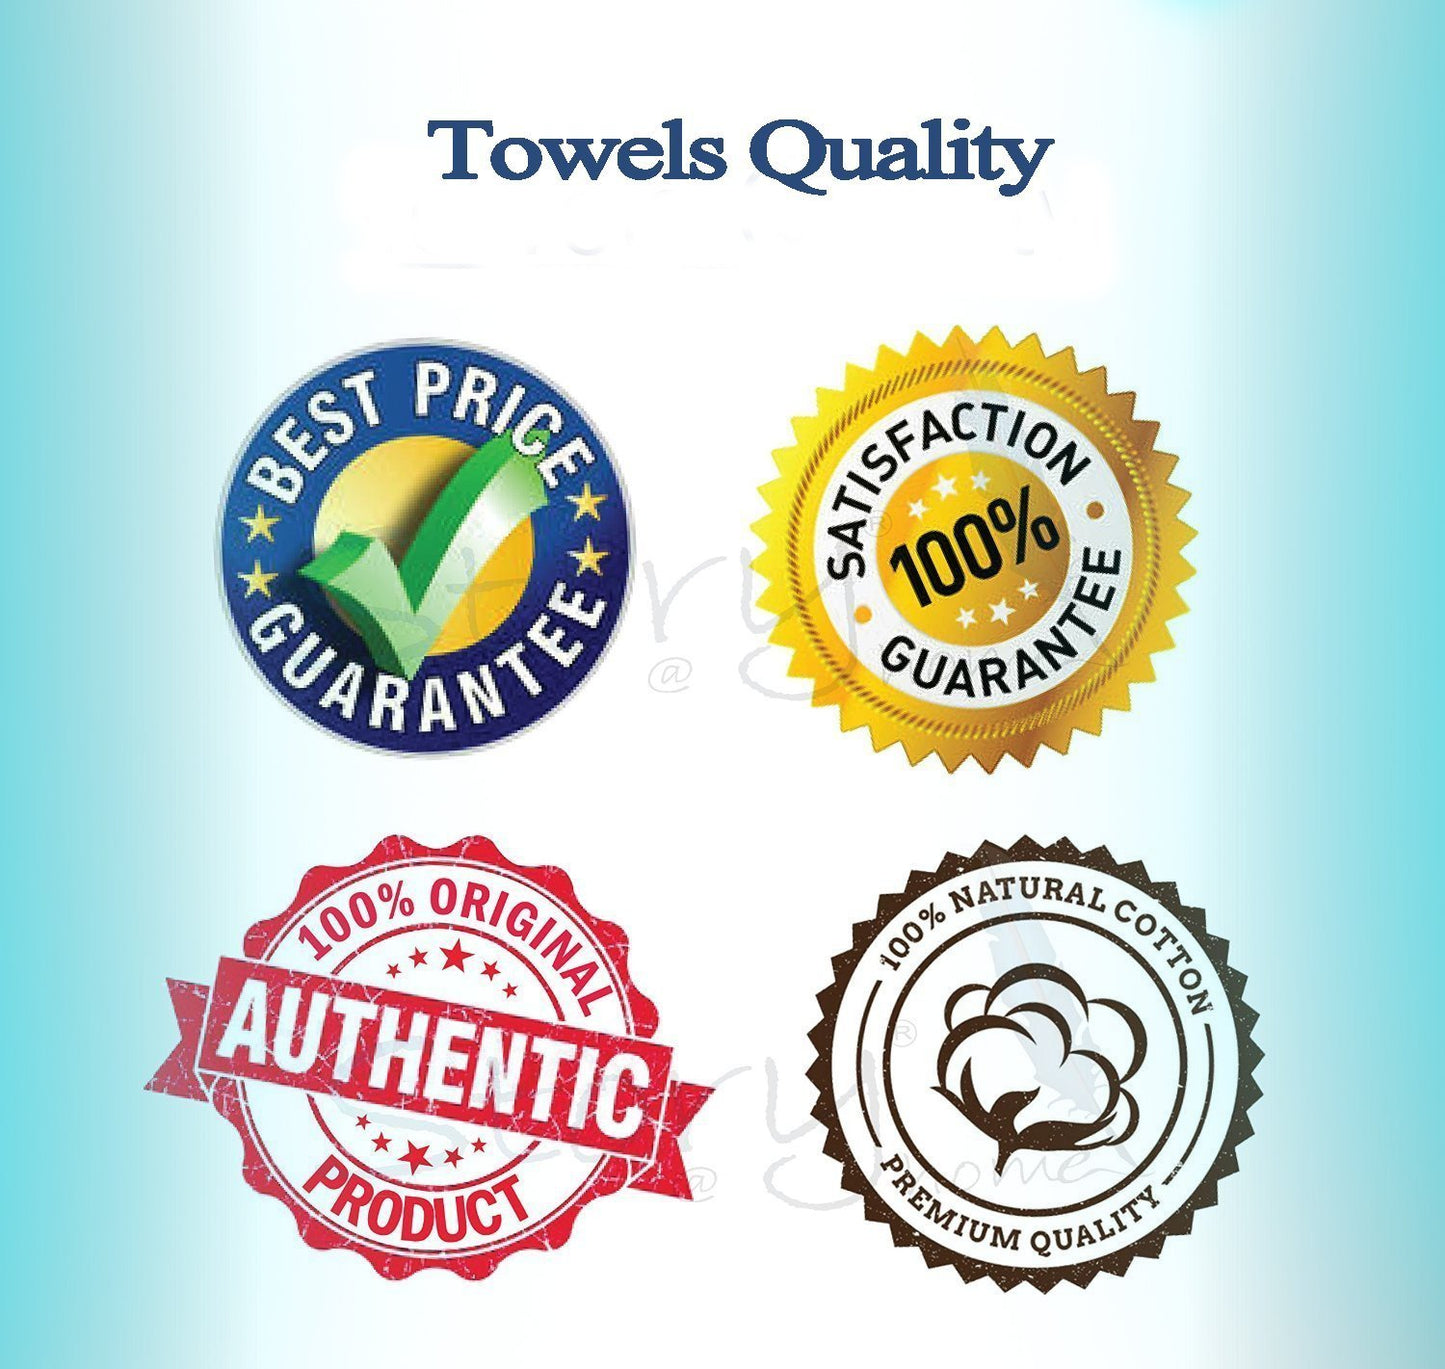 Quick Dry 100% Cotton Checked 500 GSM Bath Towel (White, Set of 3)